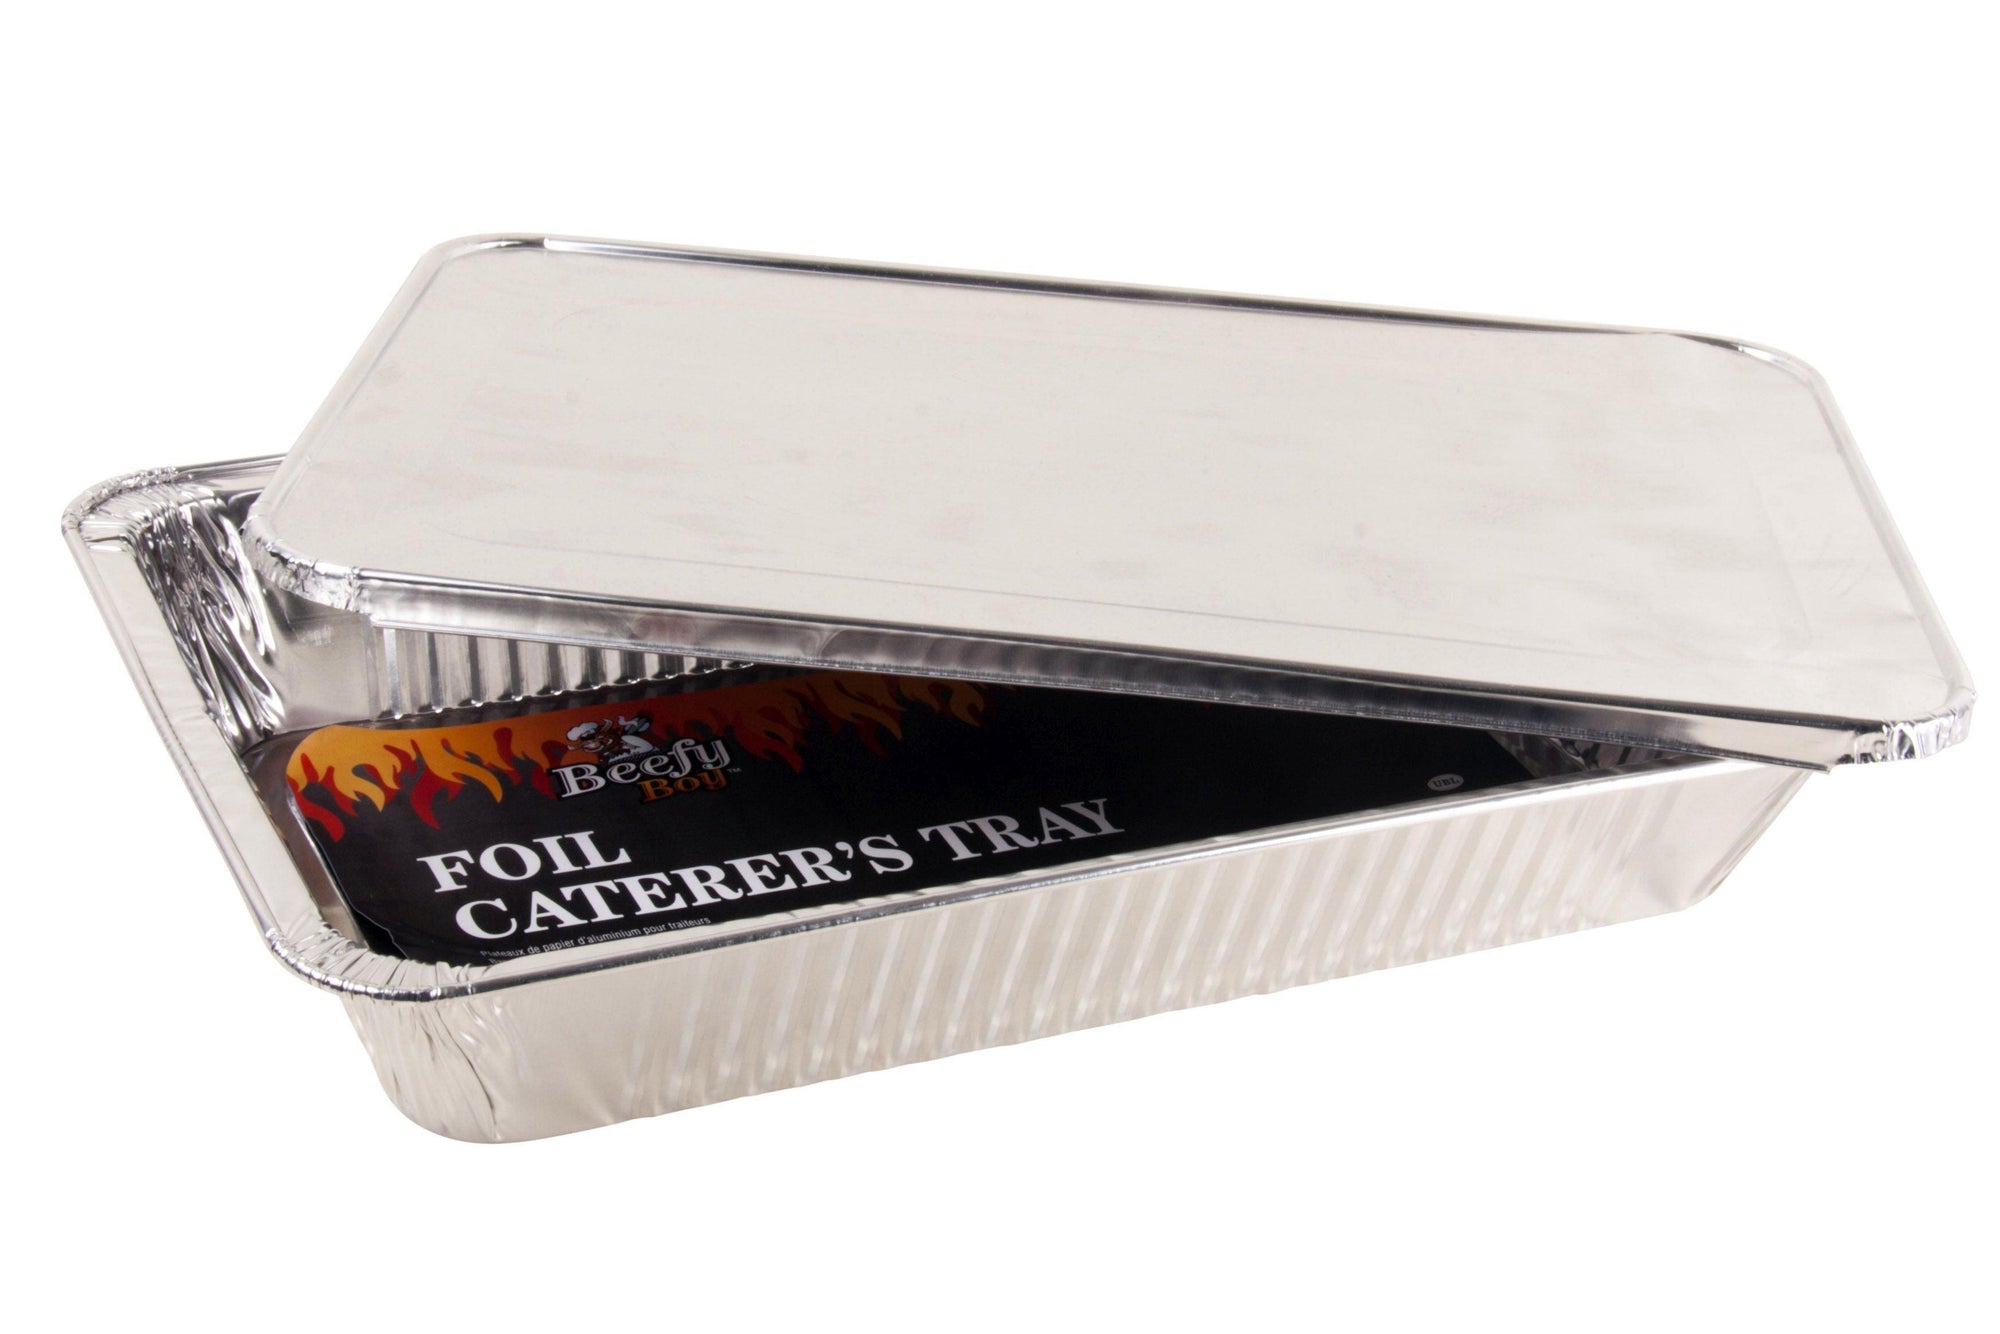 Foil Catering Tray With Lid | 52cm x 32xm x 9cm - Choice Stores